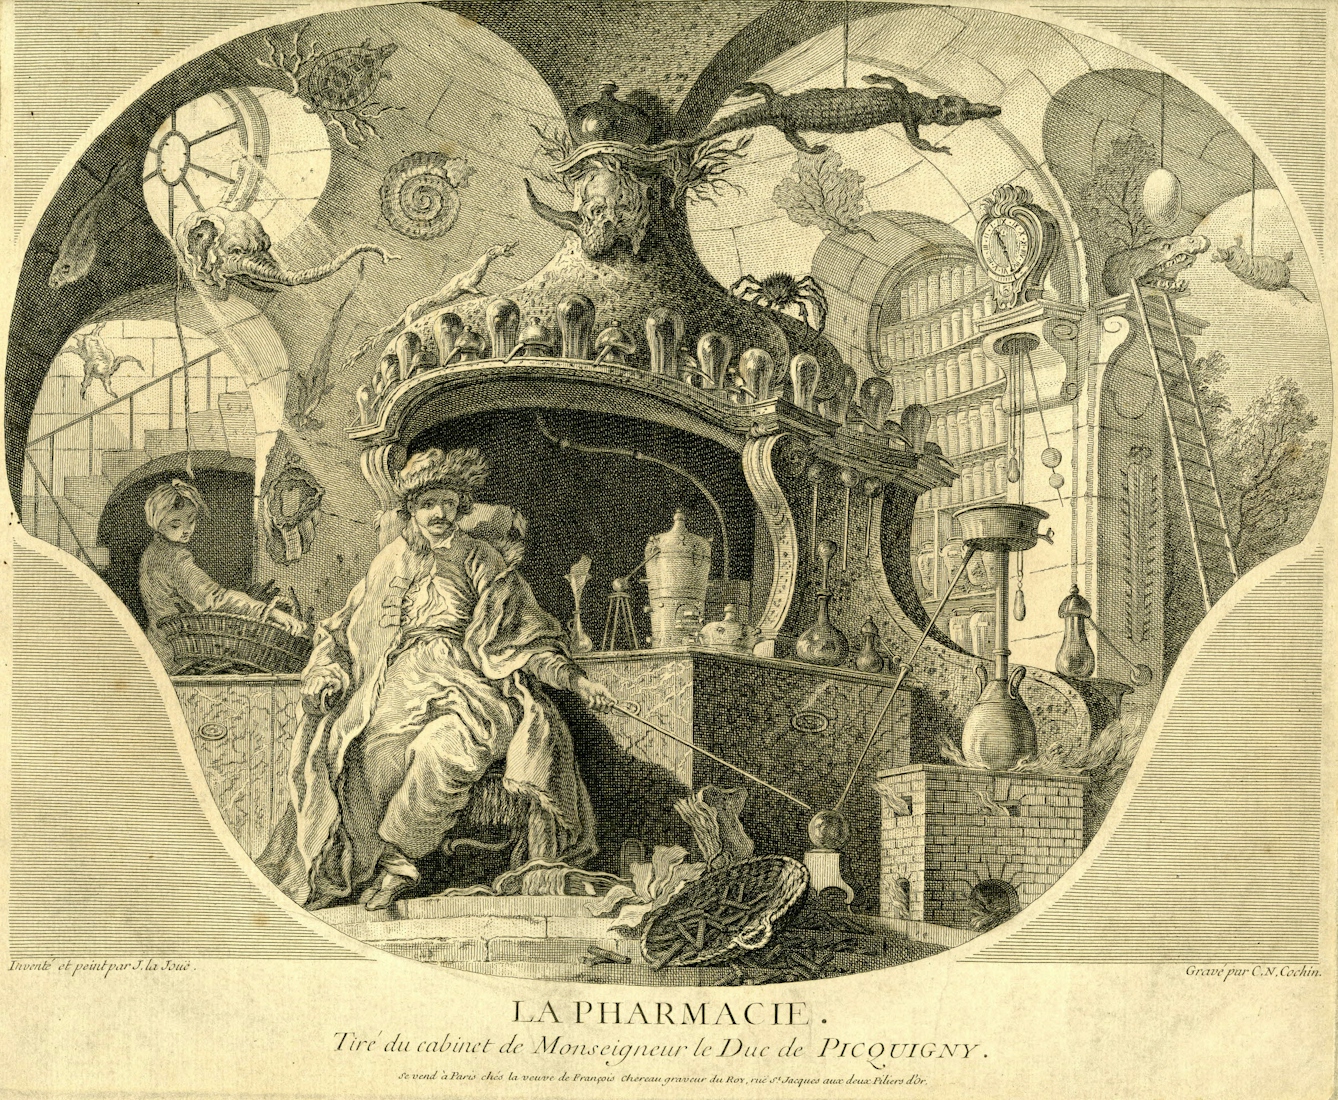 18th century engraving of an 18th century pharmacist in his shop, surrounded by all the paraphernalia of his trade.